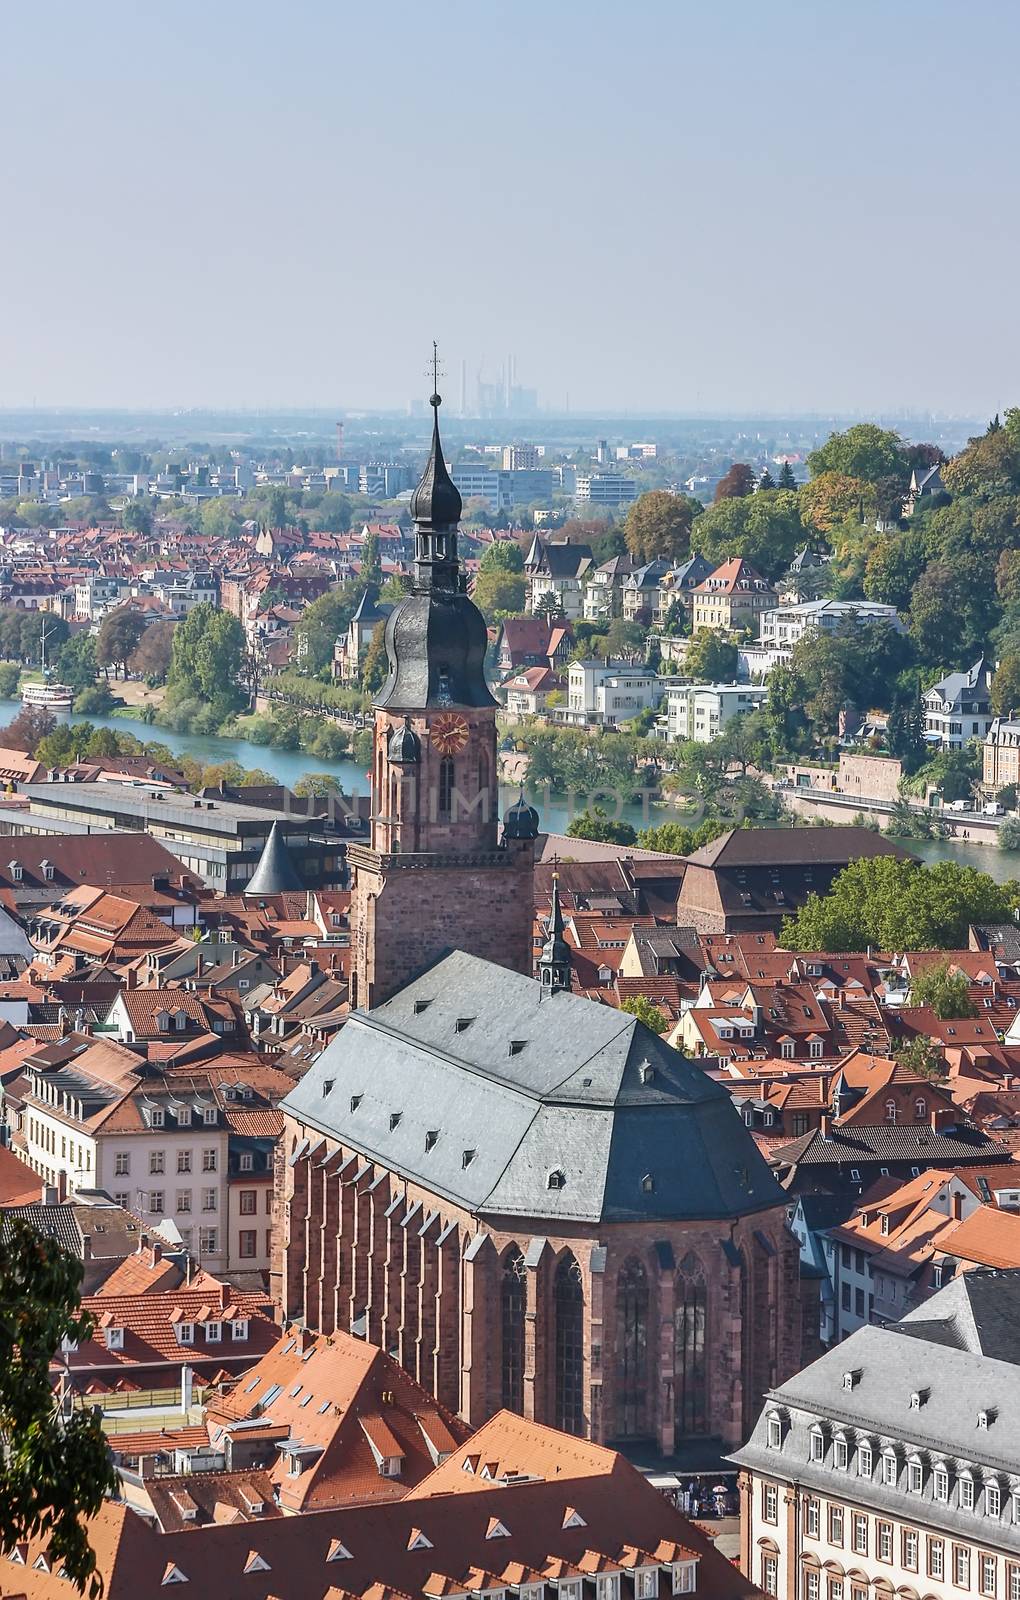 Situated on the banks of the river Neckar, Heidelberg is one of Germany most beautiful towns. Top view of the Heidelberg and Church of the Holy Spirit